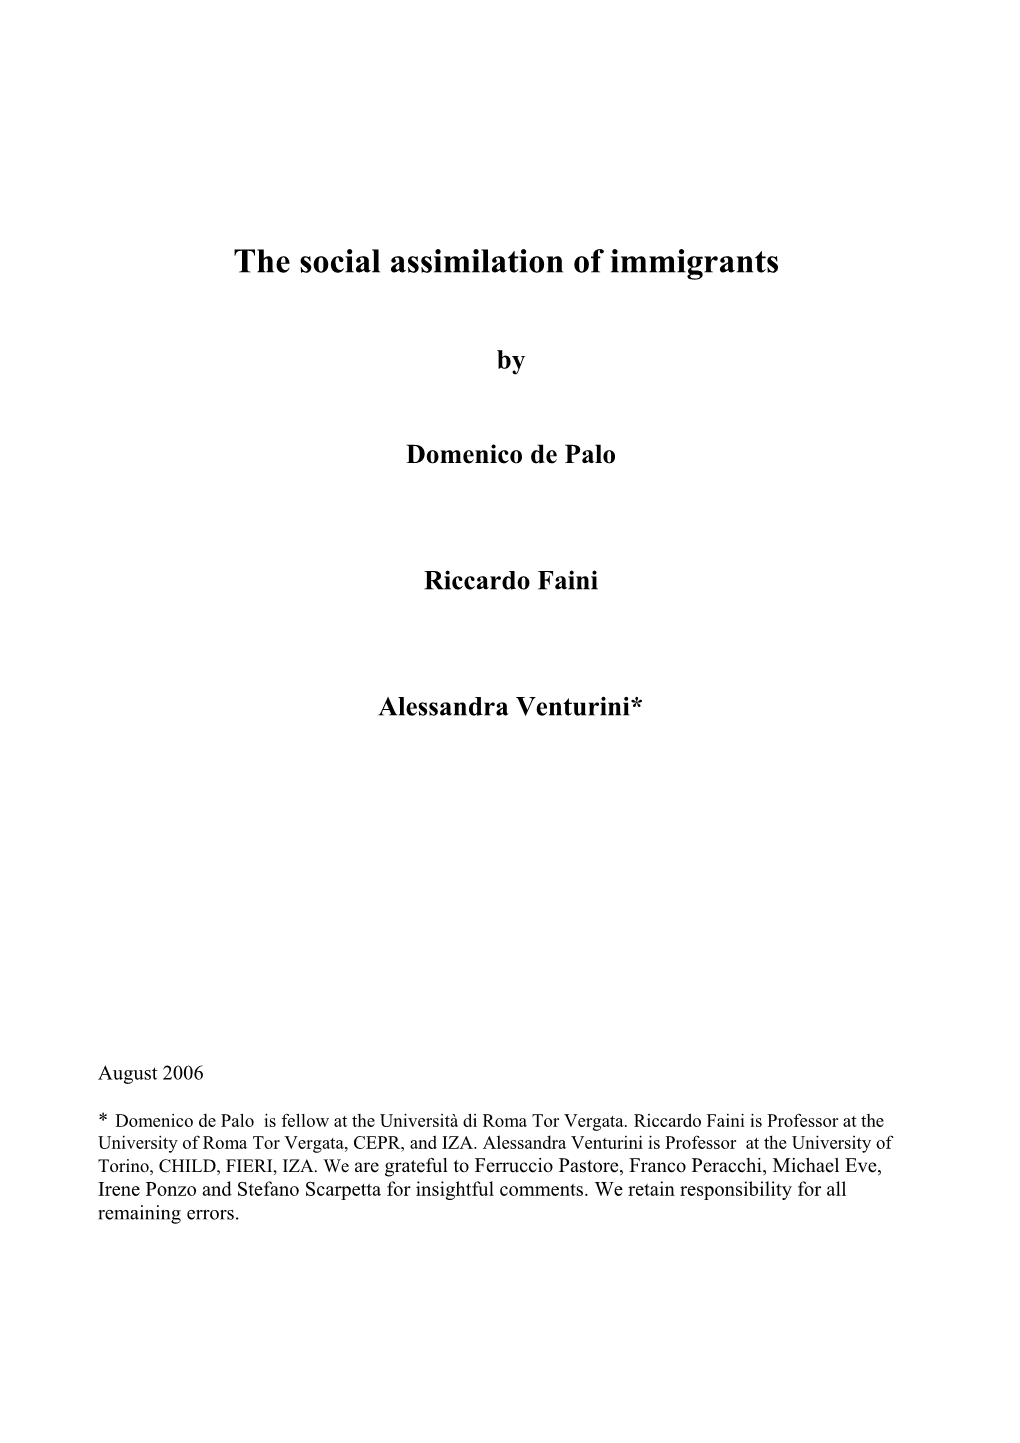 Immigration Is a Socially and Politically Highly Divisive Issue